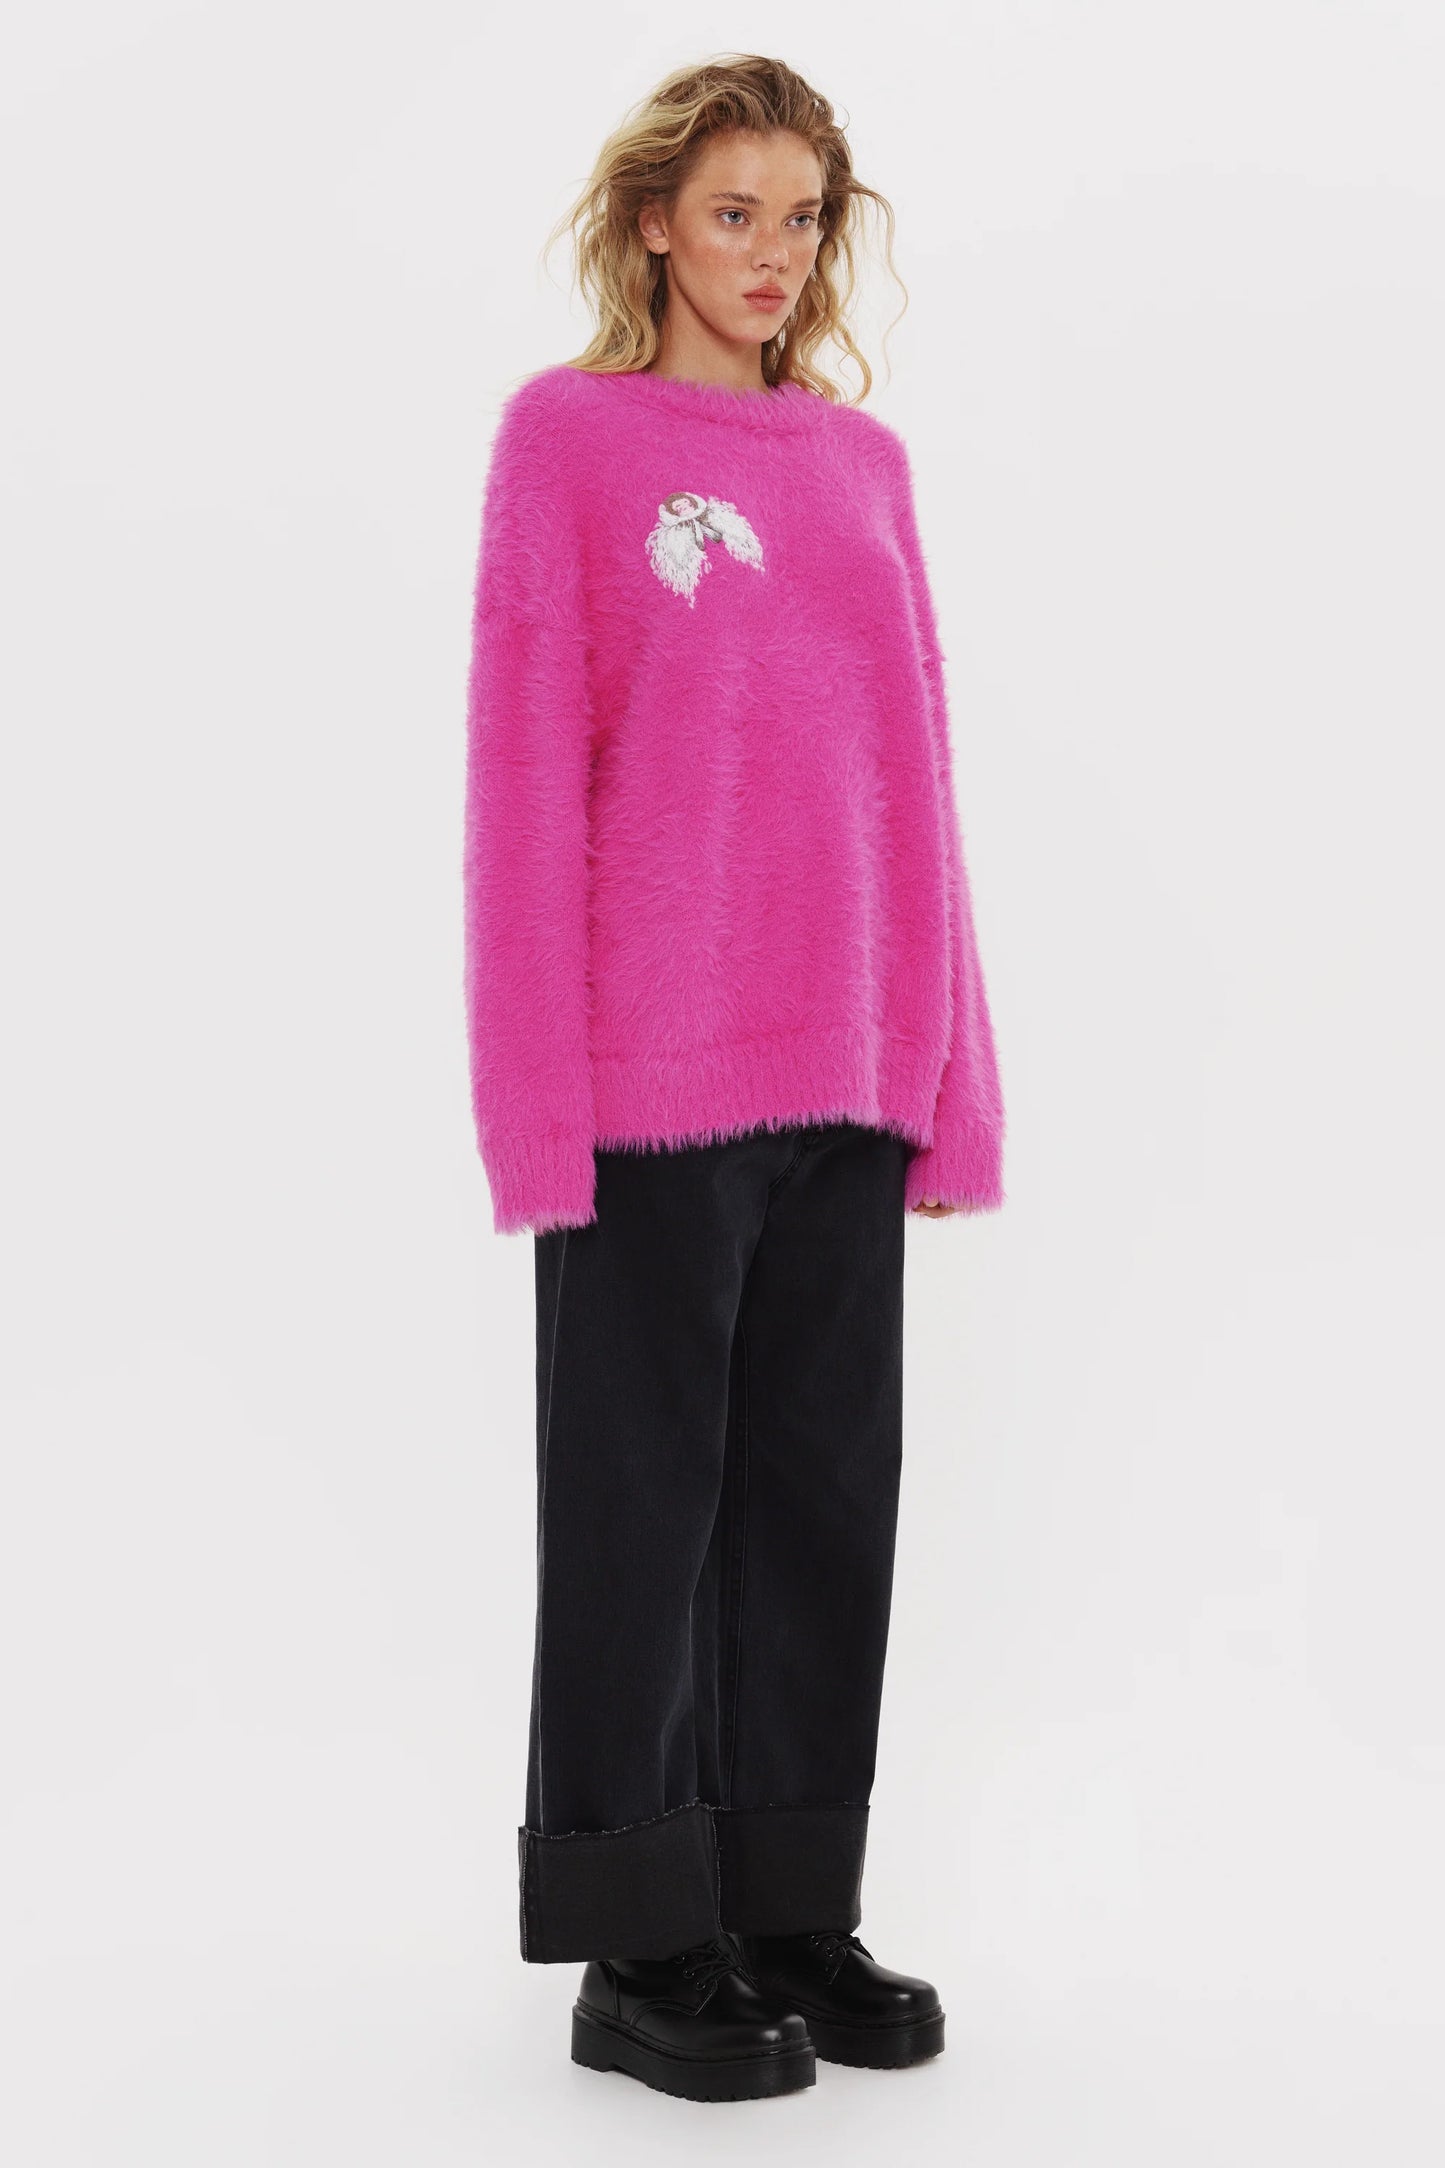 INLOVER Pink Sweater